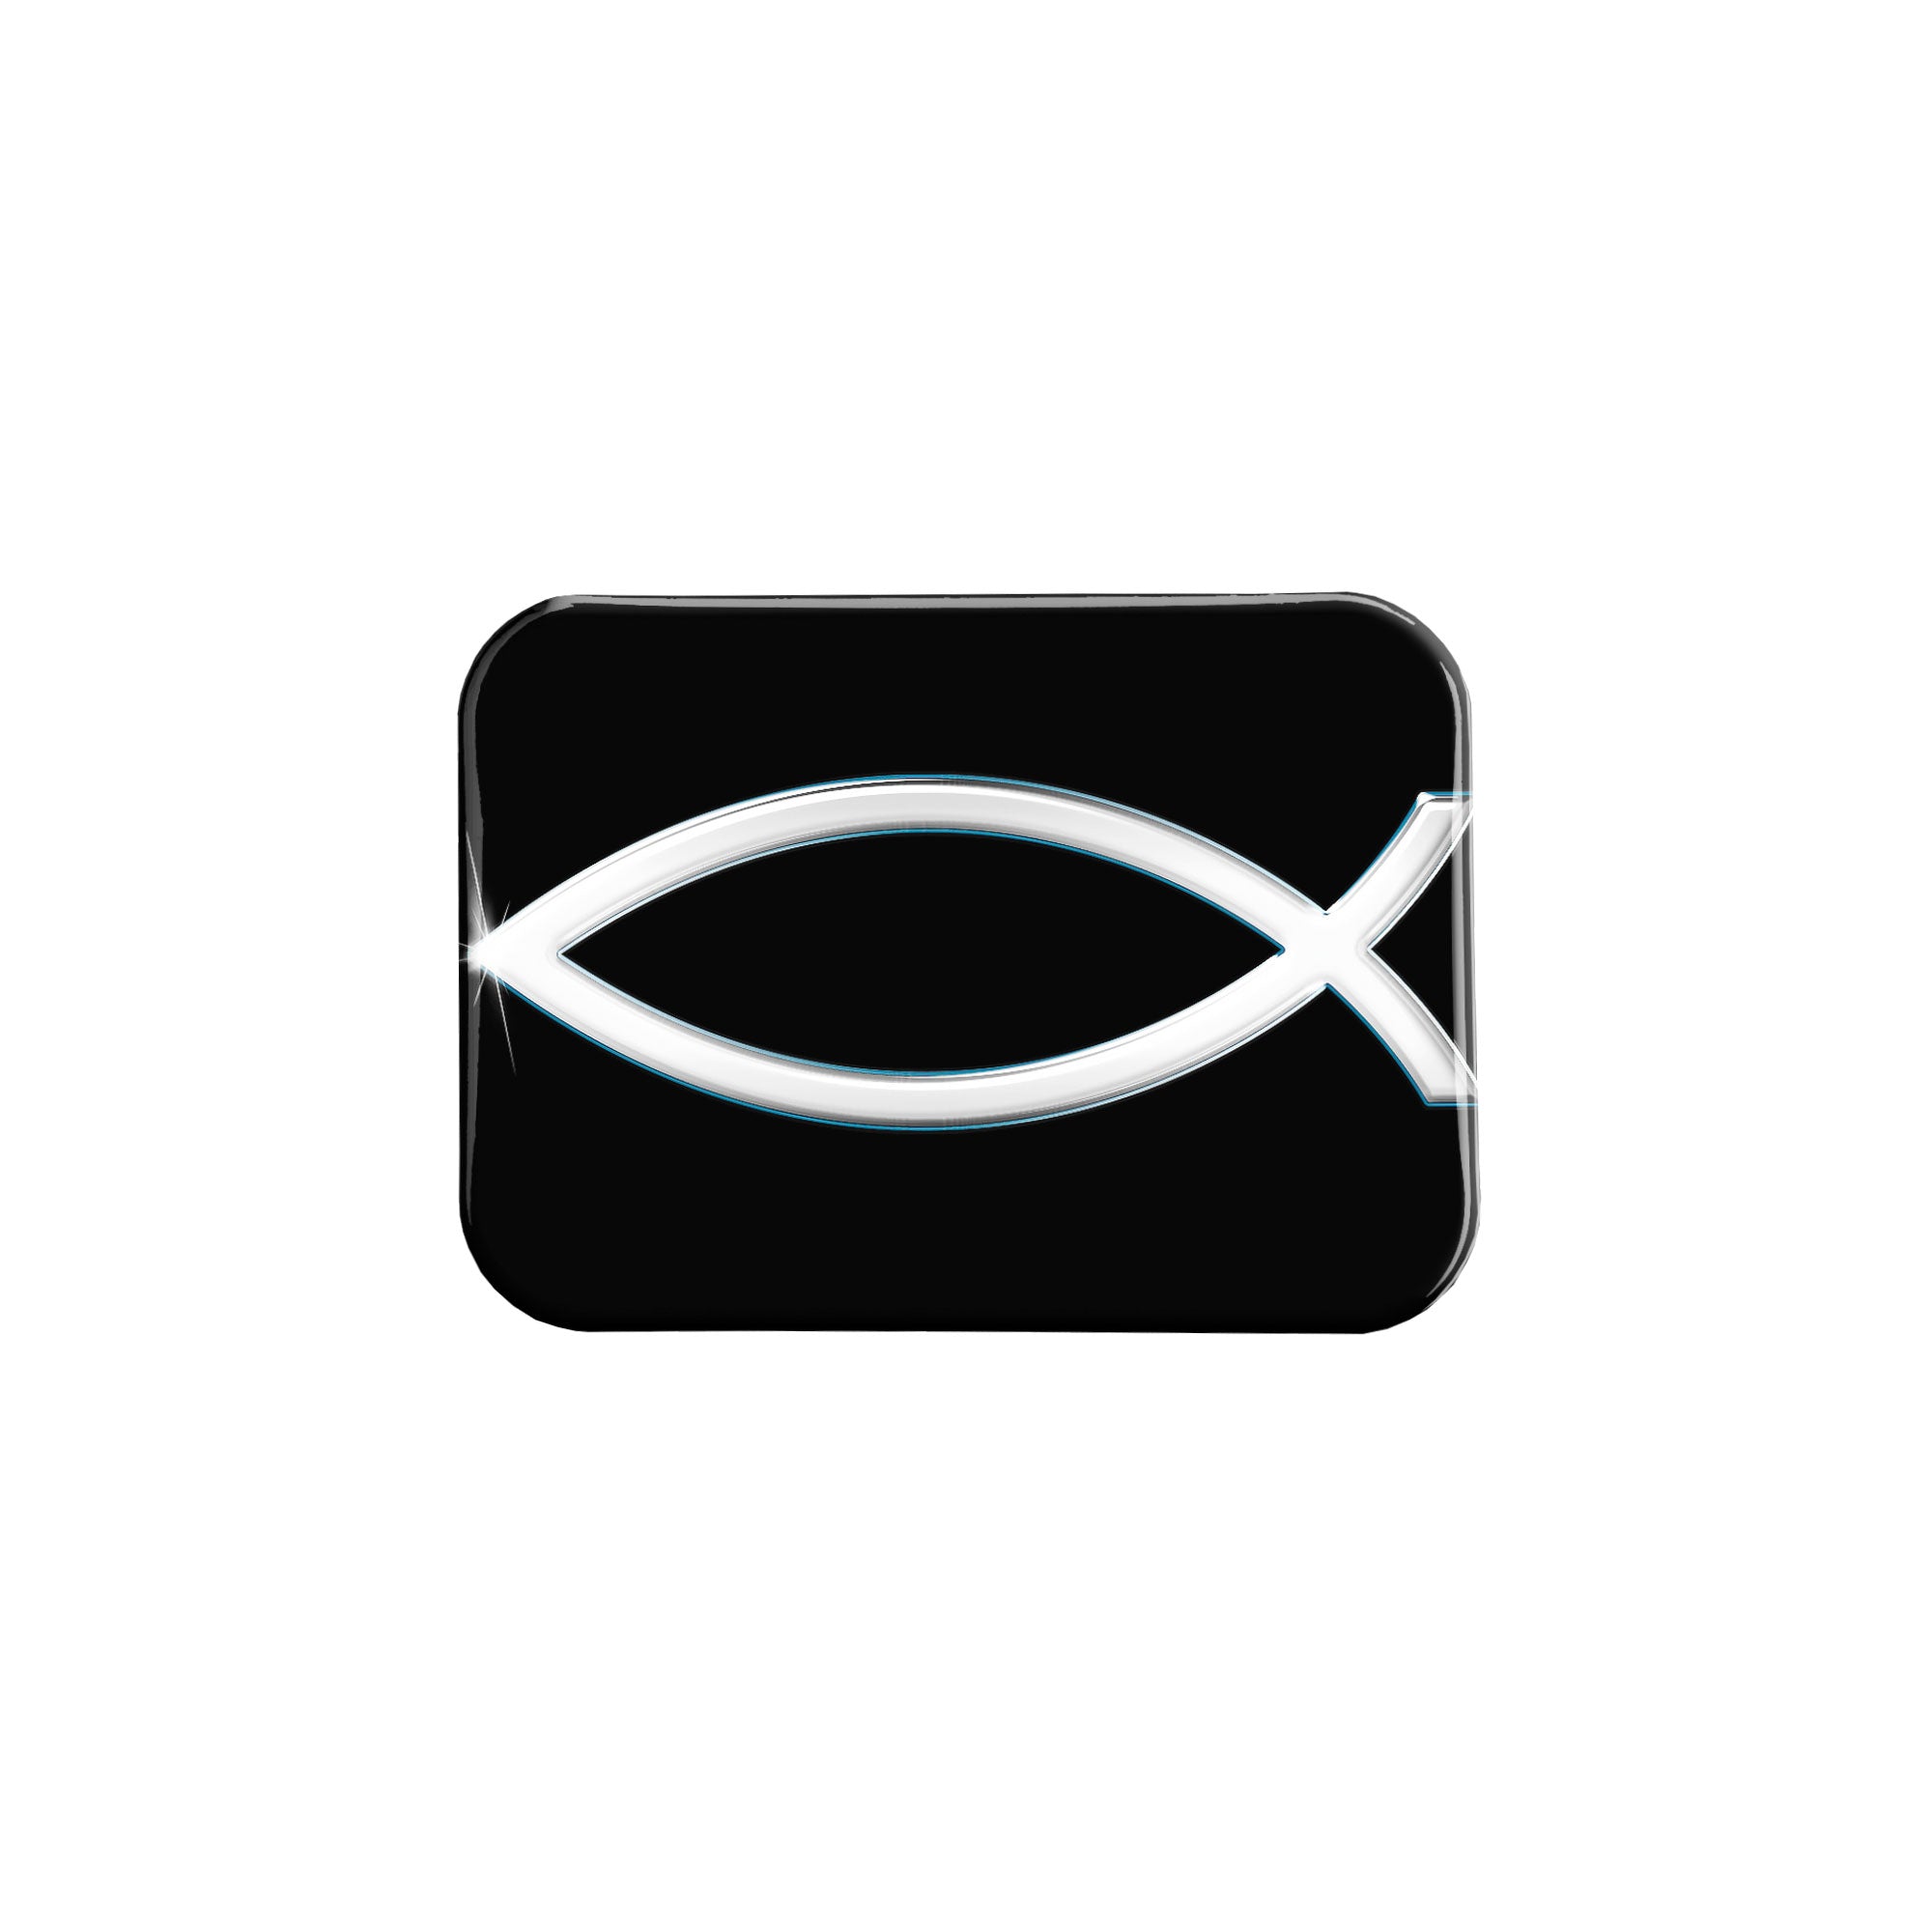 "Christian Fish in Silver" - 2.5" X 3.5" Rectangle Fridge Magnets